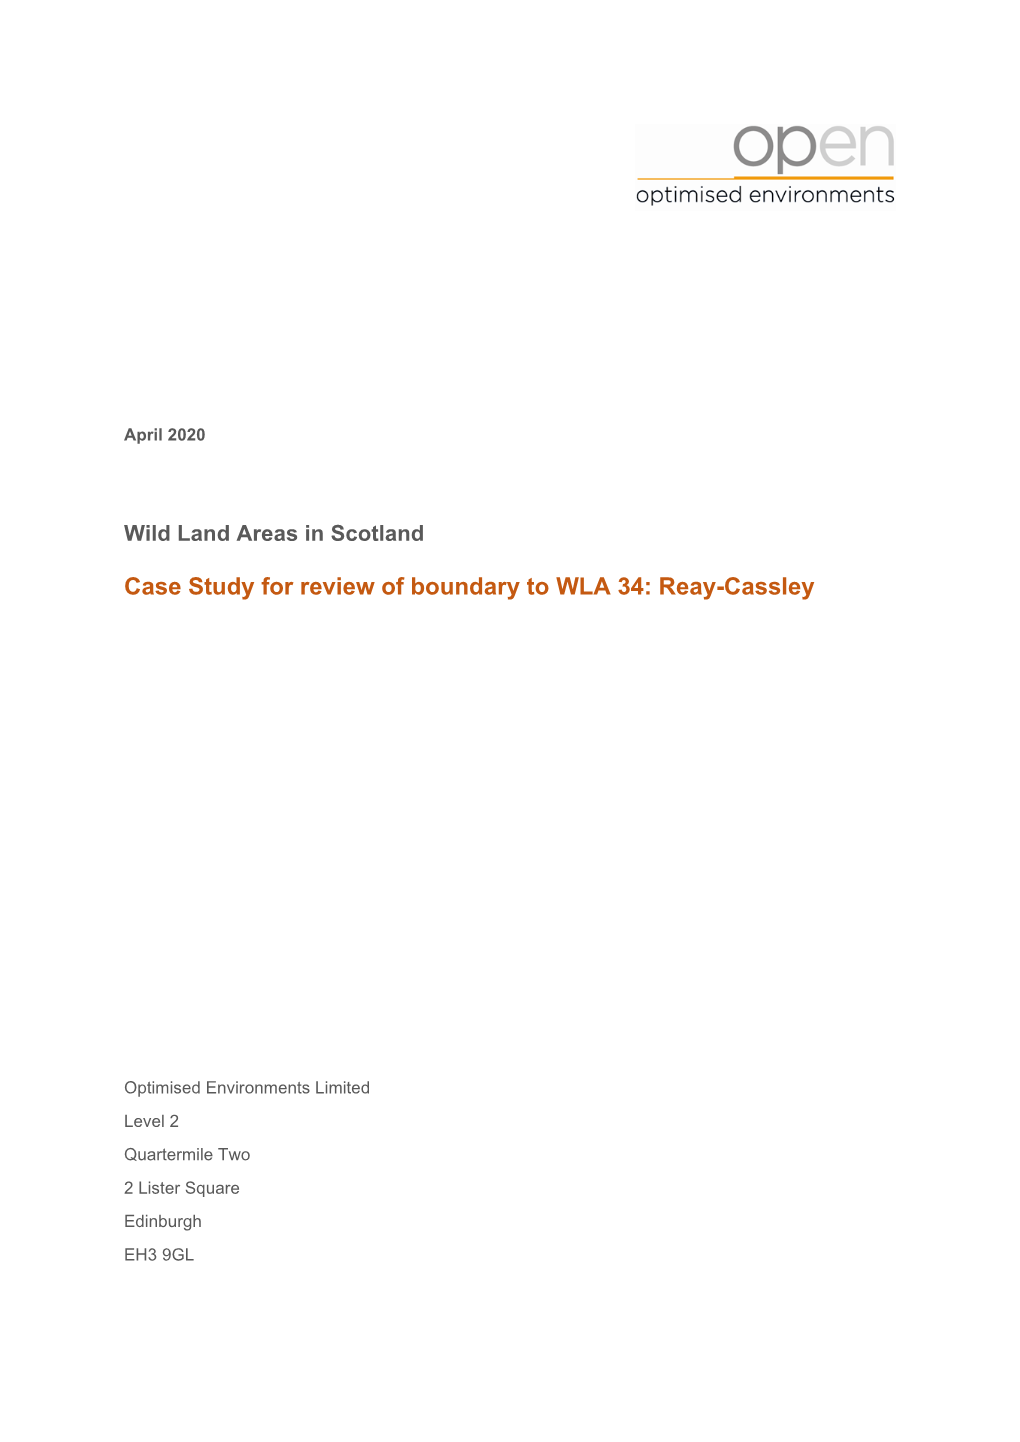 Case Study for Review of Boundary to WLA 34: Reay-Cassley